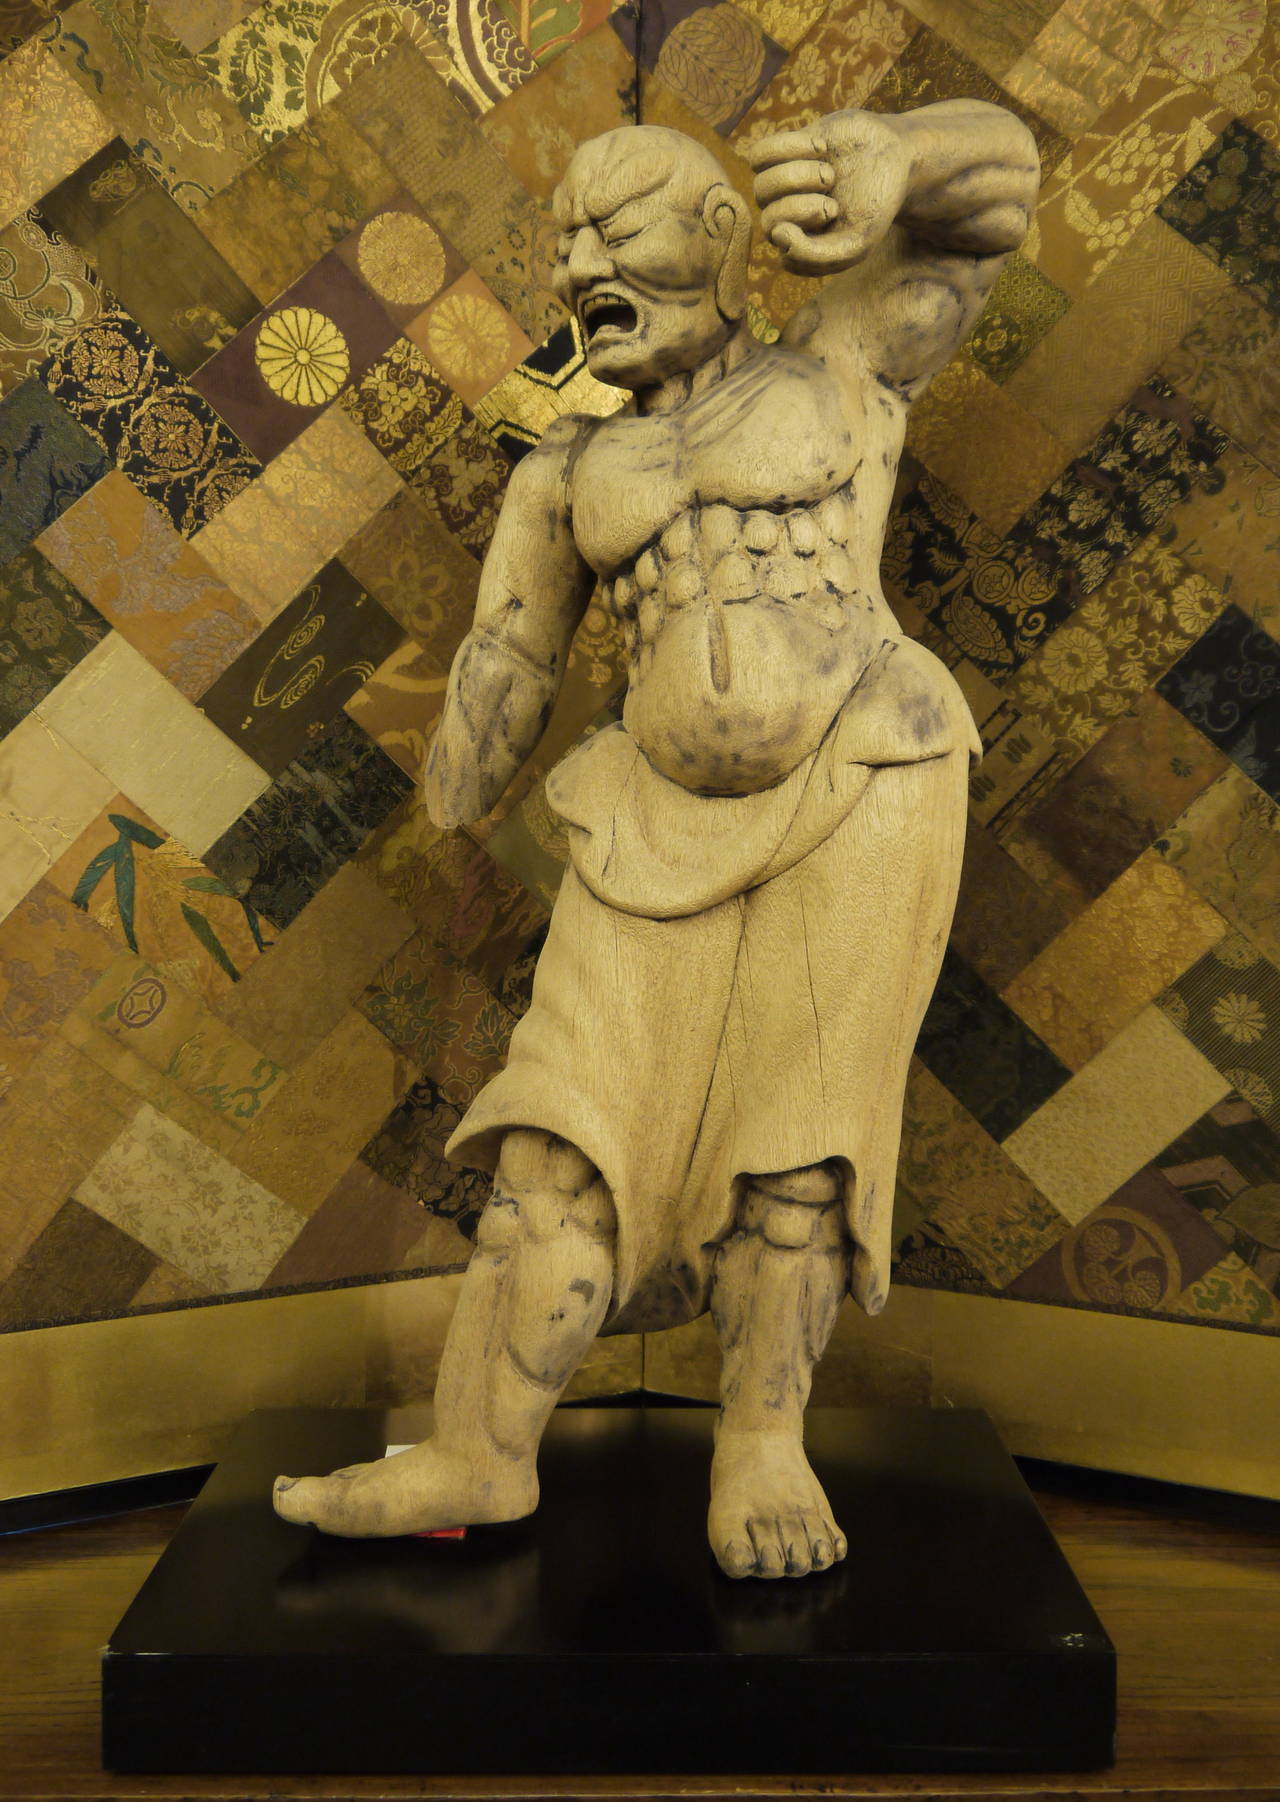 A large and dramatic muscled Nio guardian figure. 

Nio figures were placed outside Buddhist temples as protectors against evil spirits and to keep the temple free of demons and thieves.

This figure stands on a custom stand. It is 32 inches high